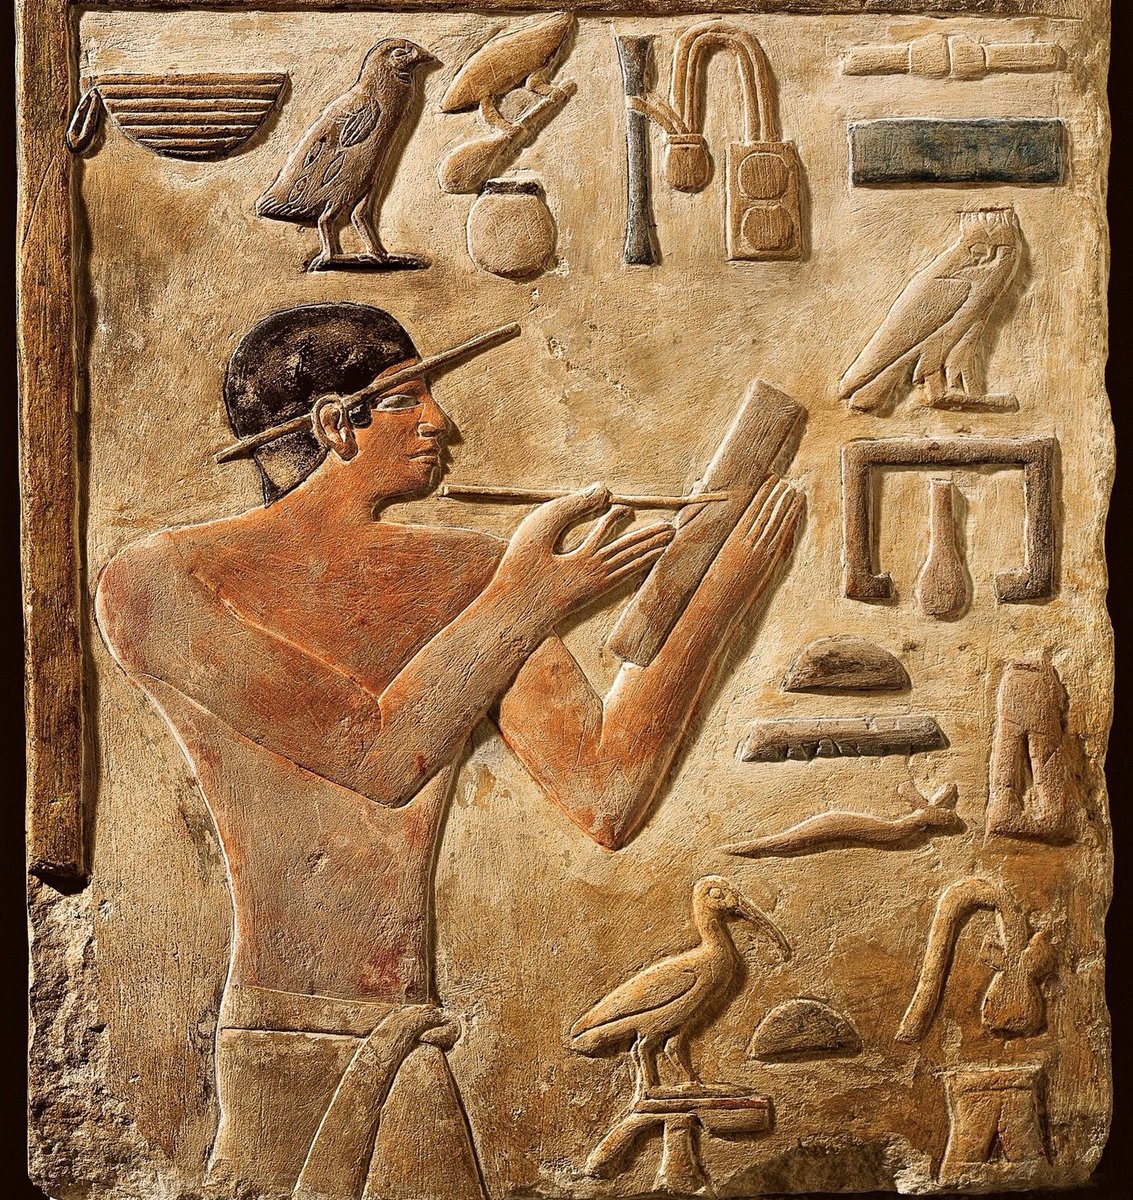 History documents a few female doctors in ancient Egypt, they were also trained as scribes so they could understand medical texts as well as document the treatments rendered. Scribes were the historians of the time and recorded historical events as well as more mundane events.